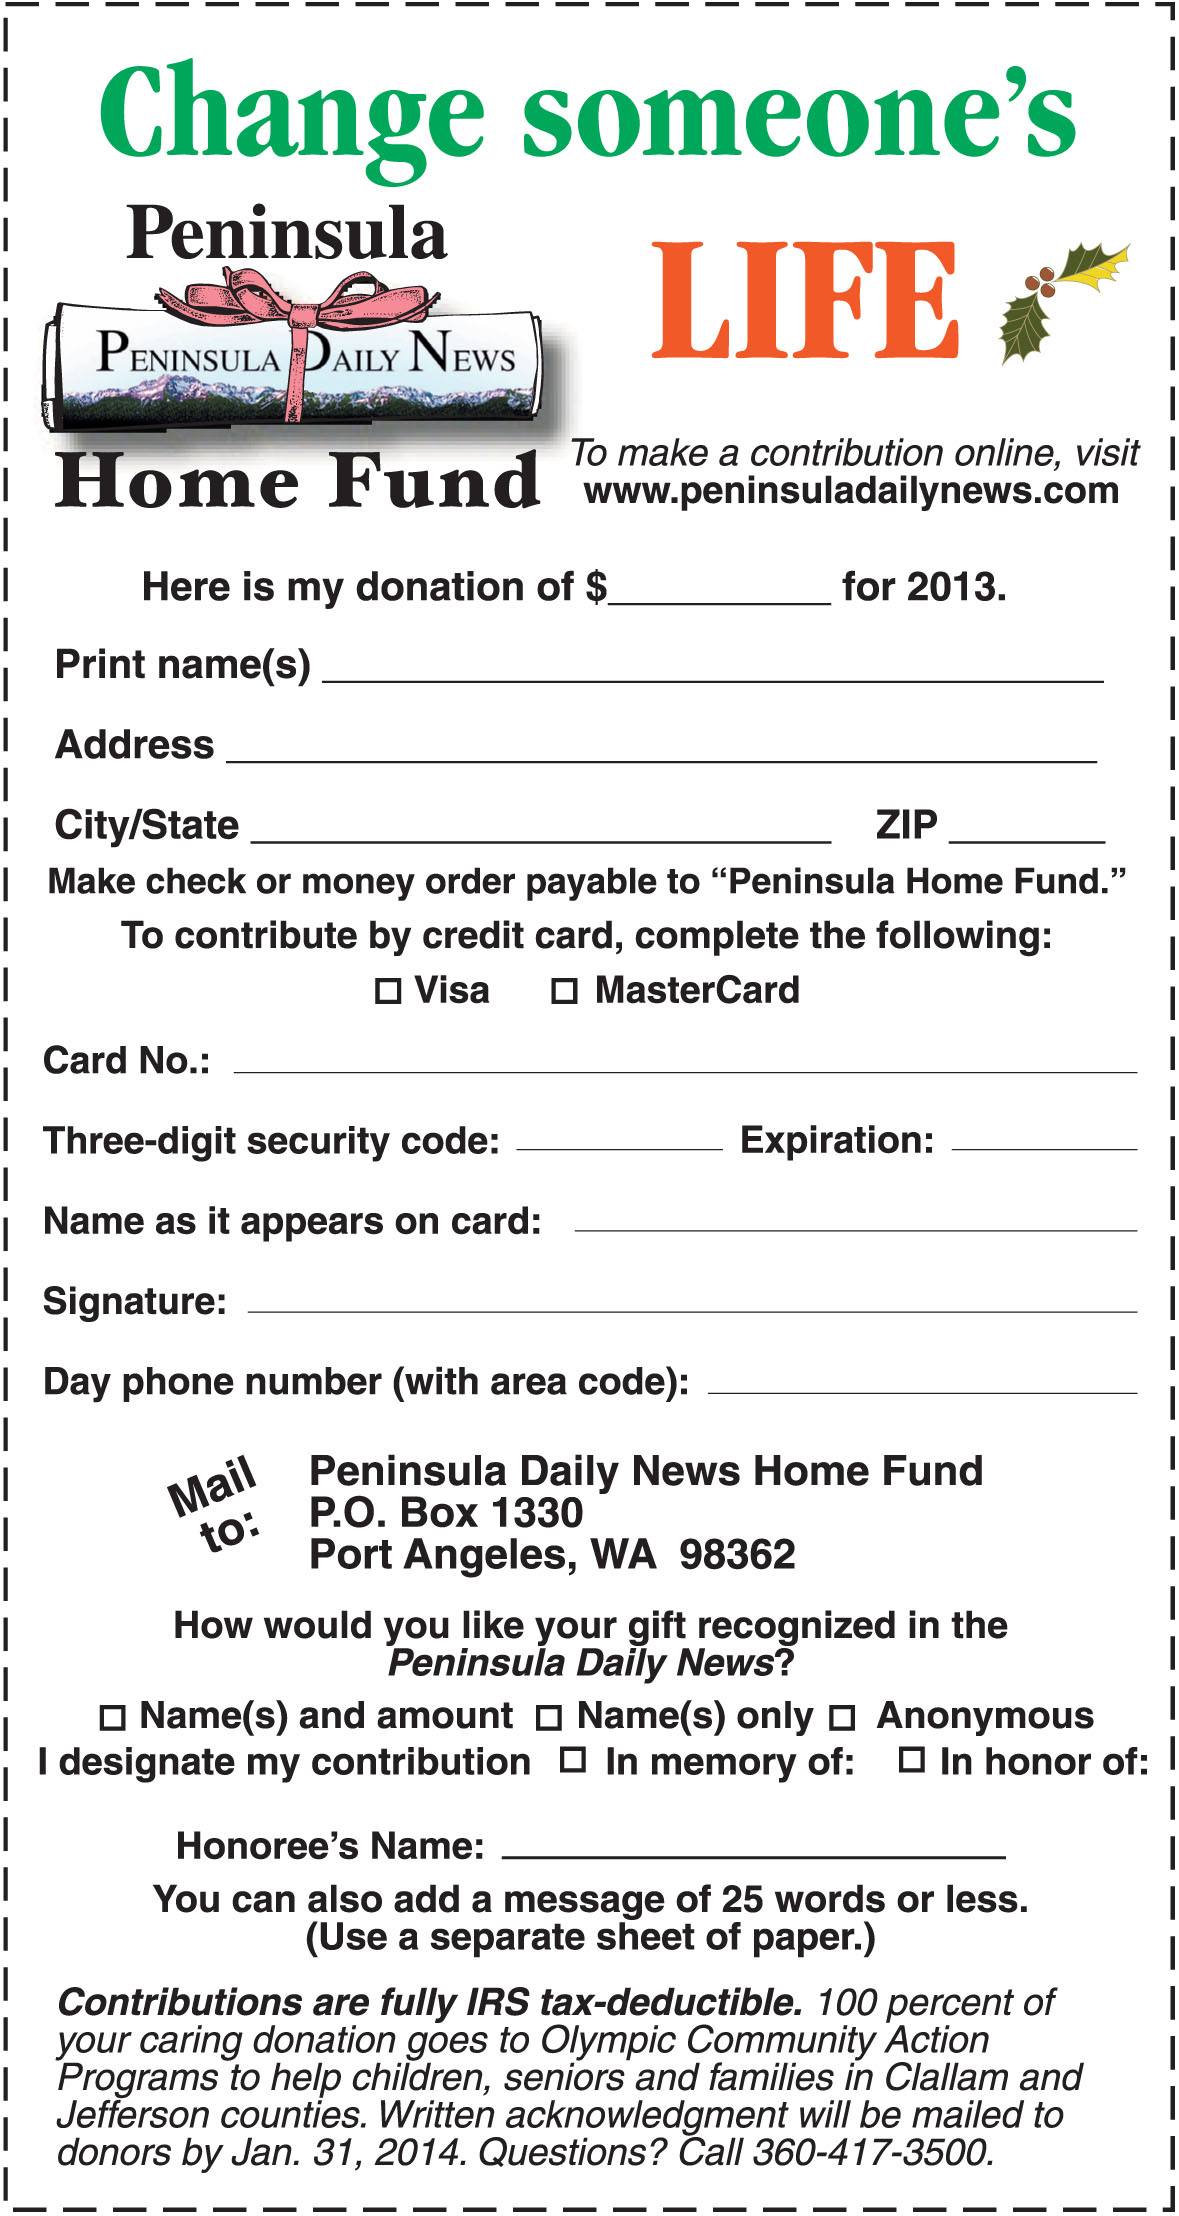 Home Fund's success is all thanks to you, Peninsula Daily News readers